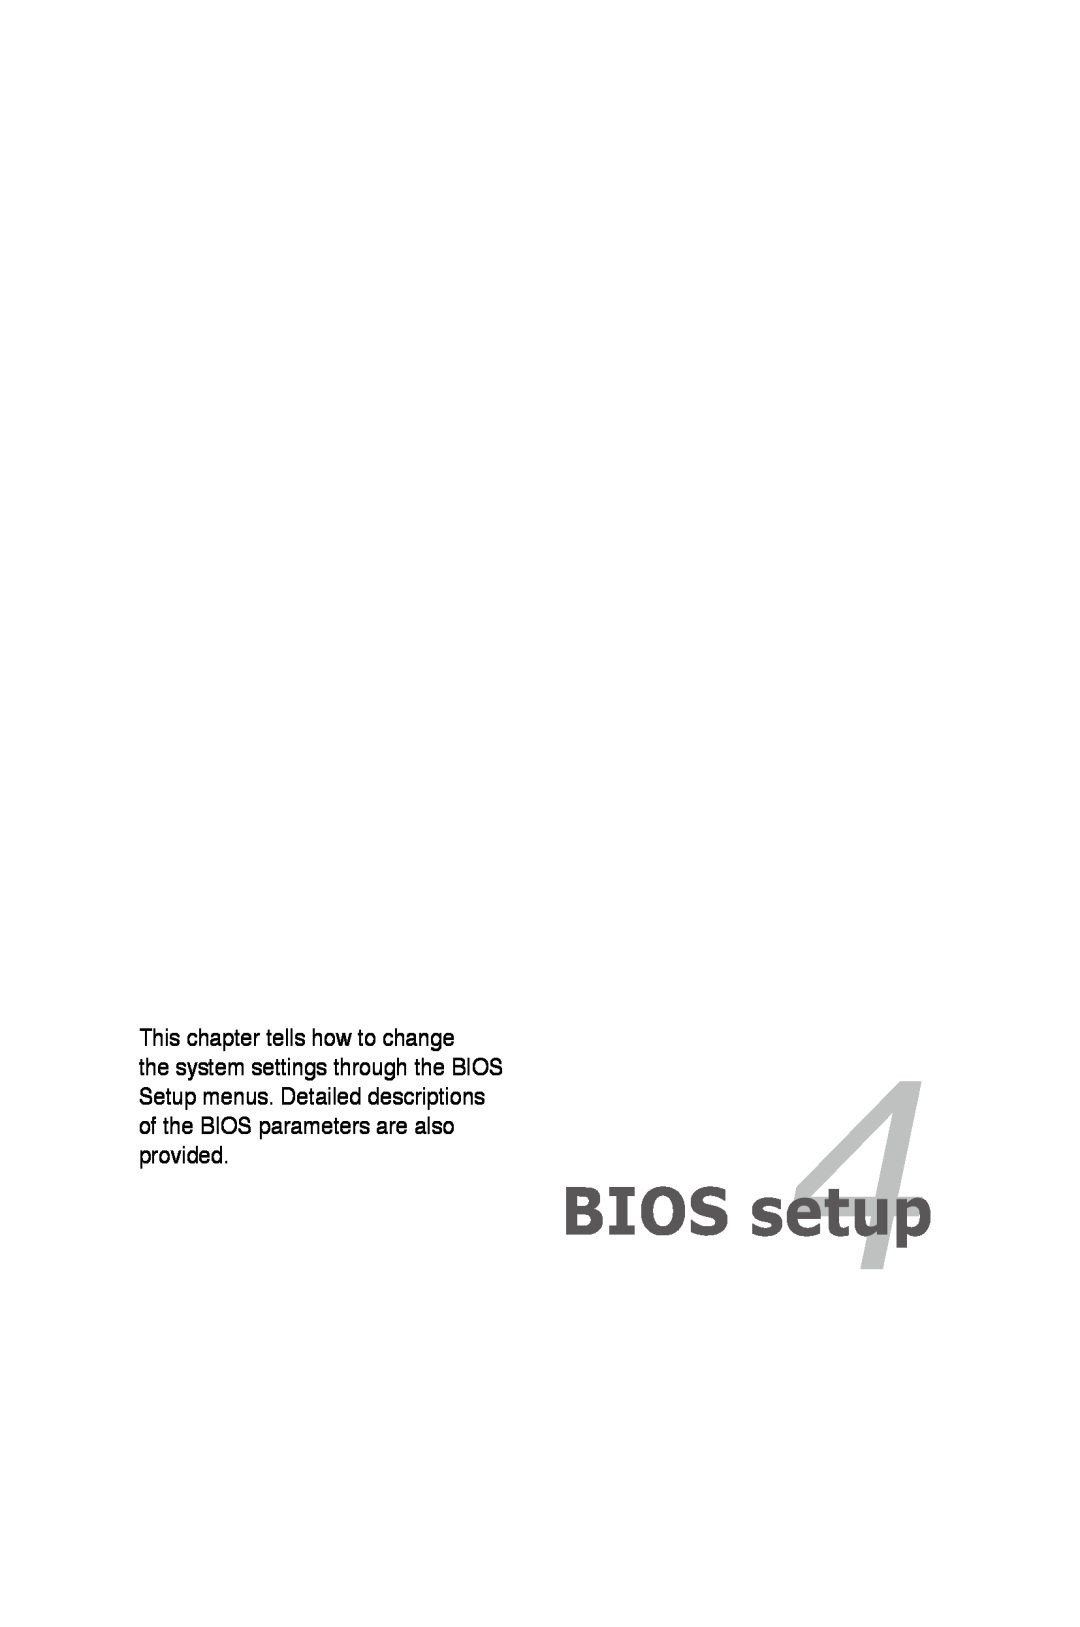 Asus P5K/EPU manual BIOS setup, This chapter tells how to change, the system settings through the BIOS, provided 